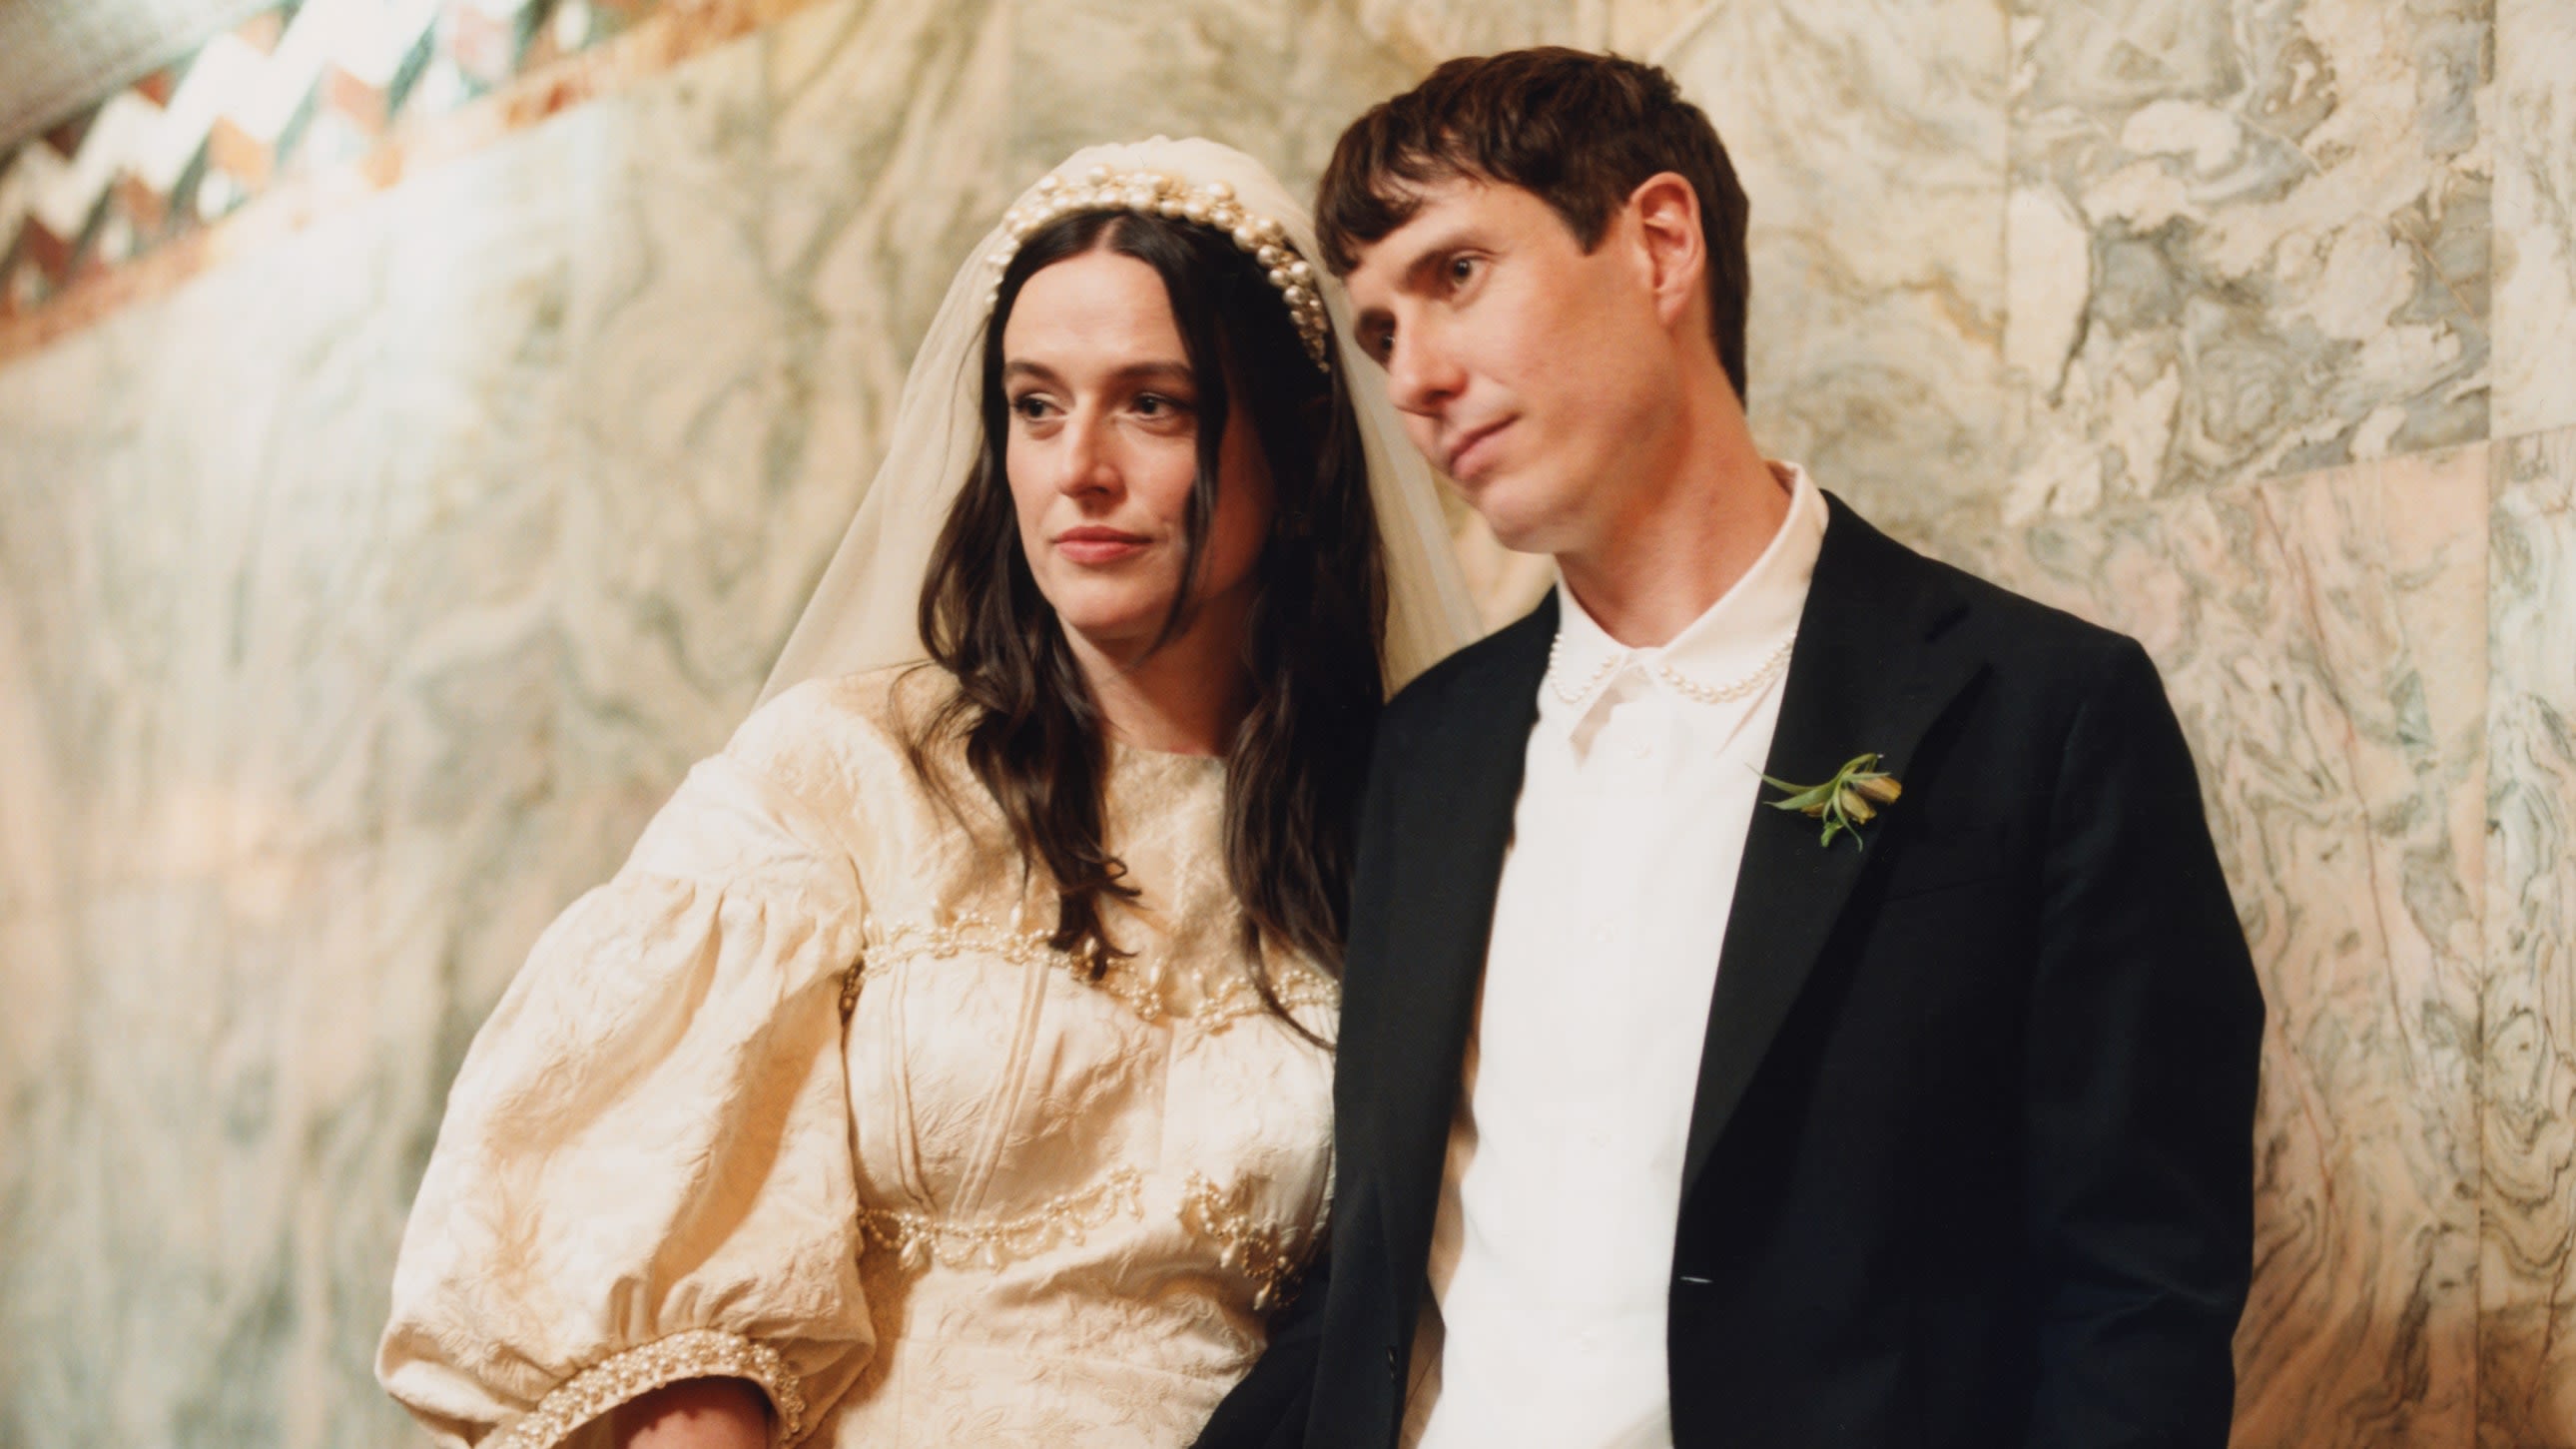 The Bride Wore Simone Rocha for Her Intimate London Wedding—And Married With Her Baby in Her Arms